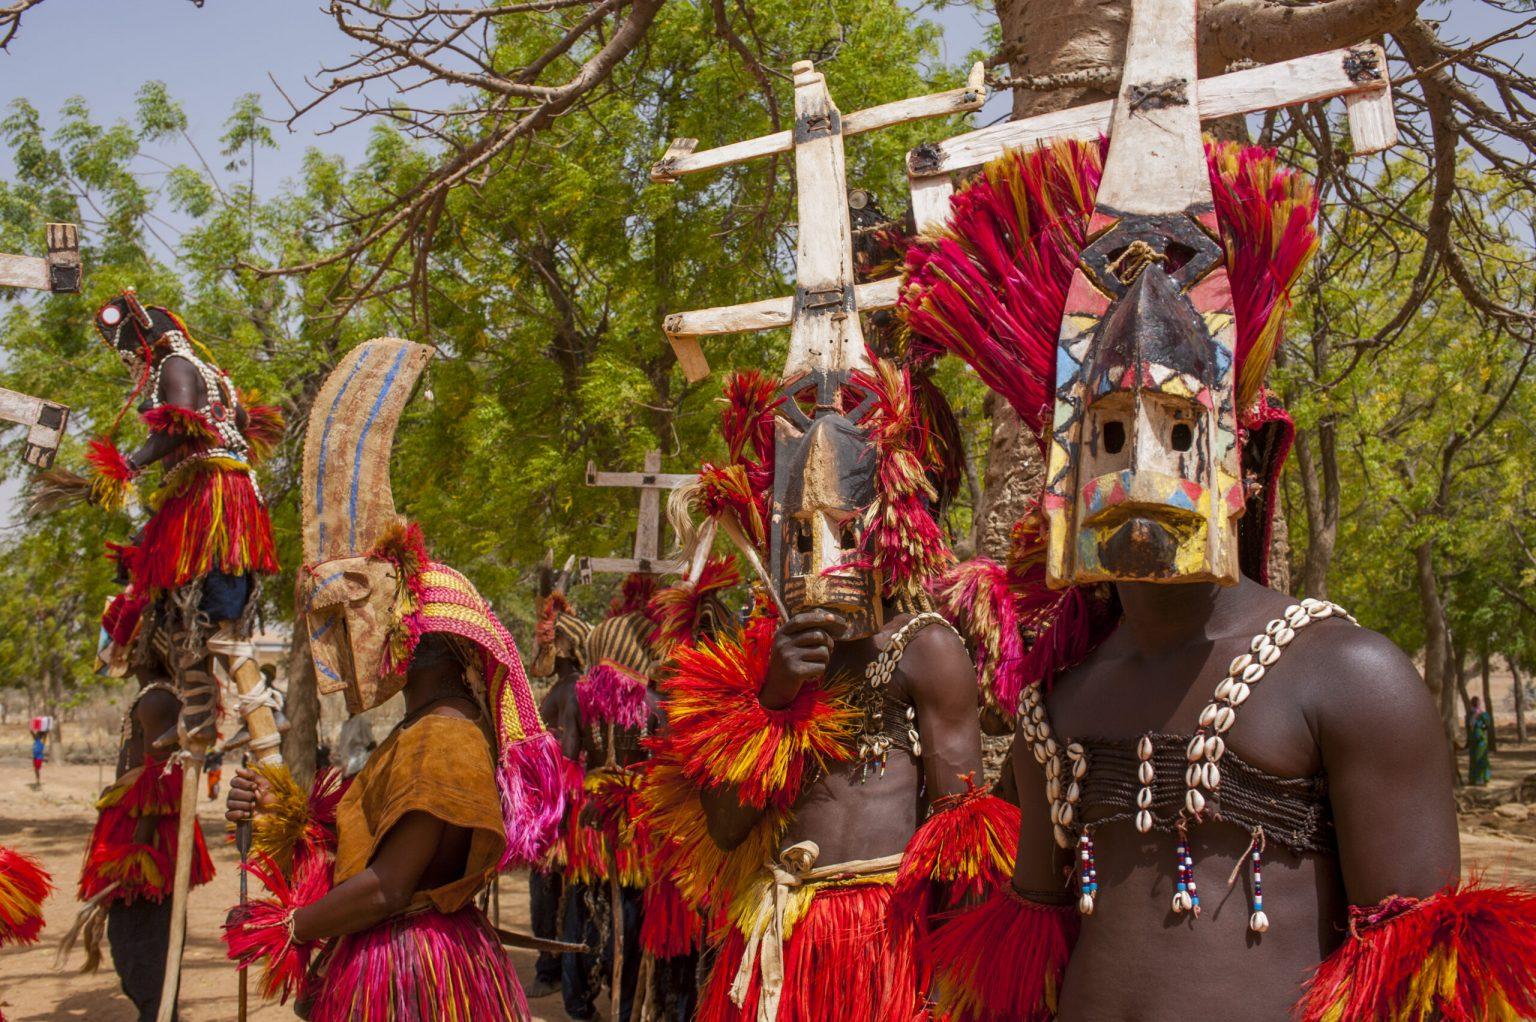 Dogon people (men only) in traditional dance costumes in the village of Sangha in the Dogon country in Mali, West Africa. Photo and story credits by Wolfgang Kaehler